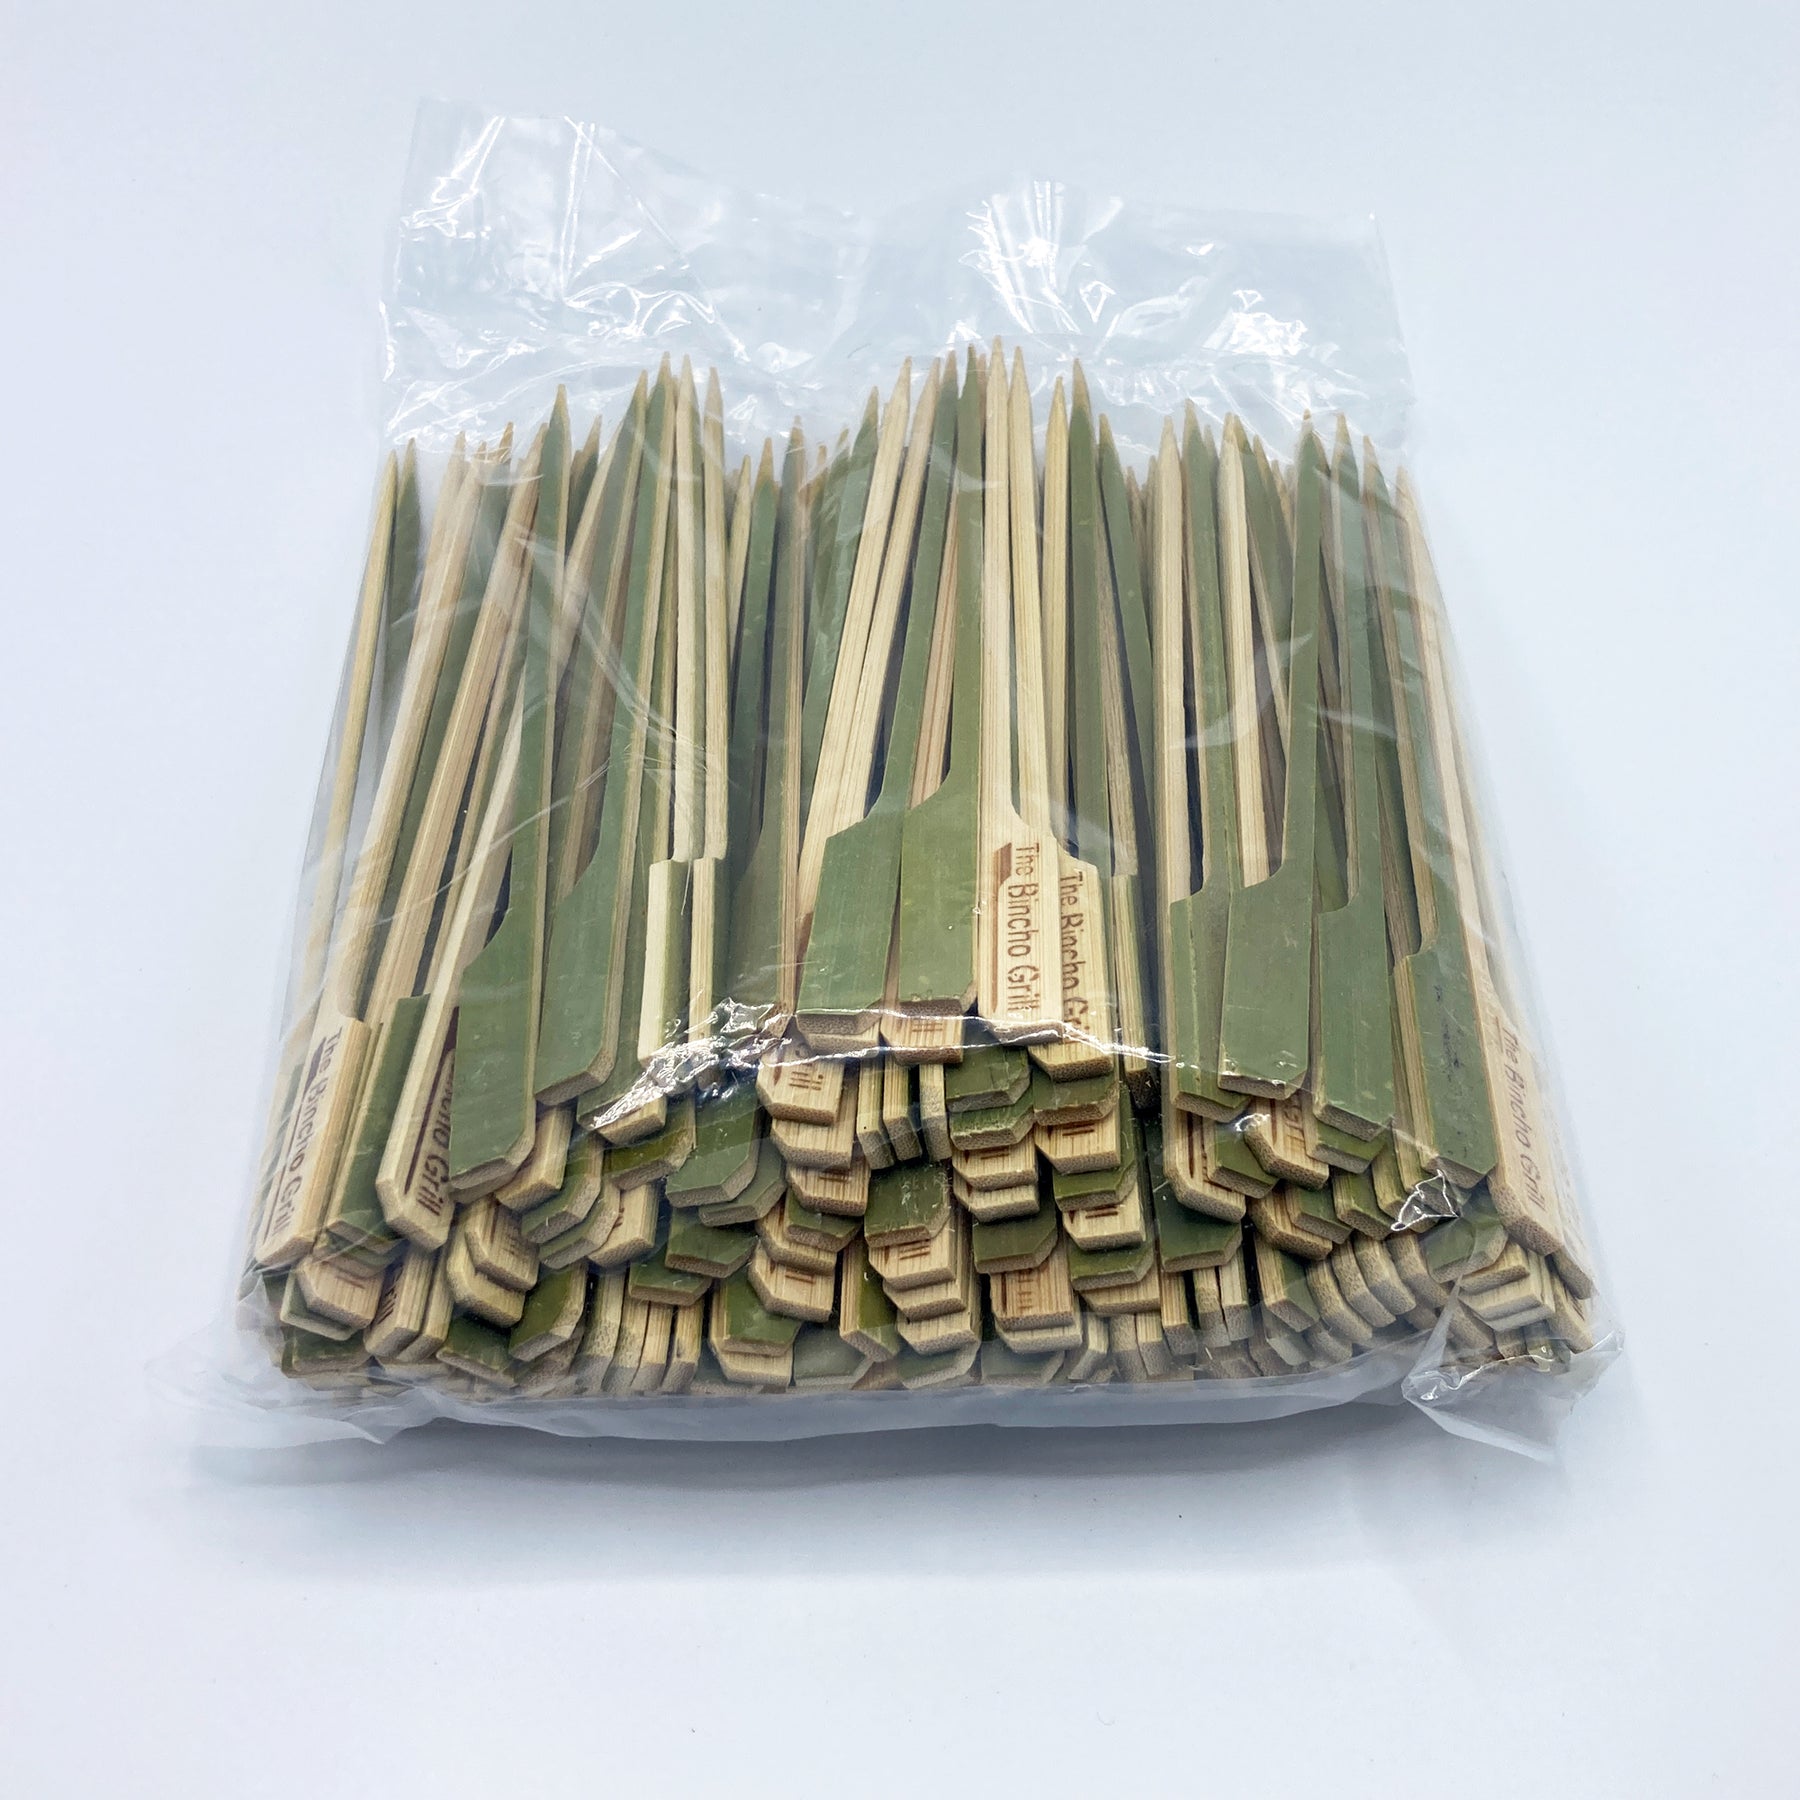 Chef Craft 3774x3 Thin Bamboo Skewers 300 Piece, 6 inch